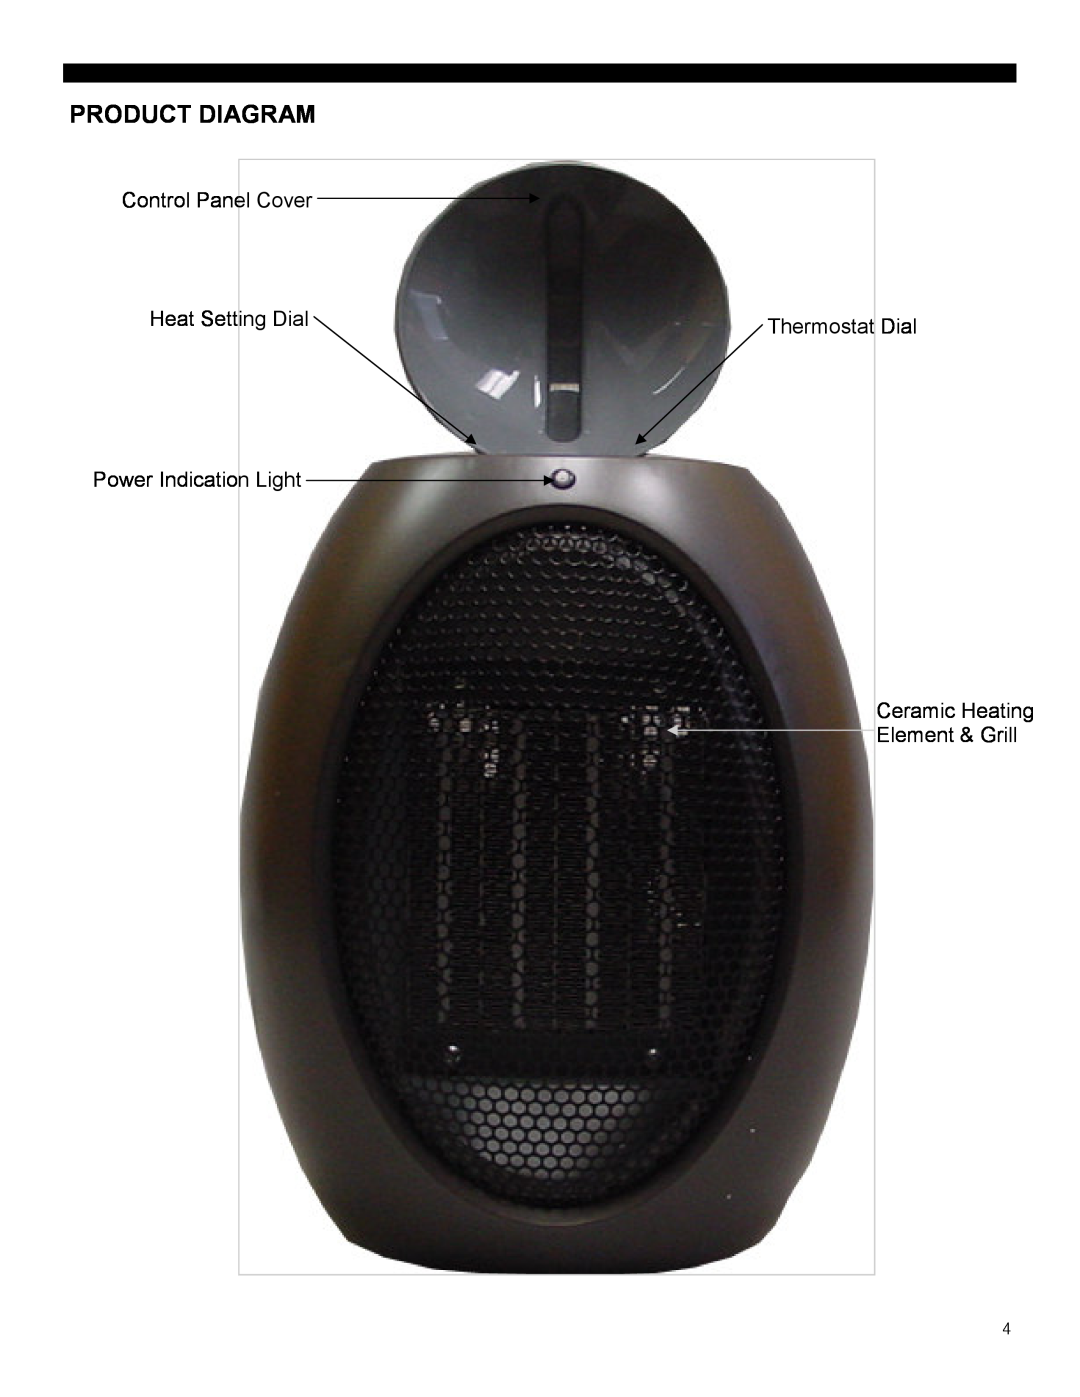 Soleus Air HC4-15-32 manual Product Diagram, Control Panel Cover, Heat Setting Dial, Thermostat Dial, Element & Grill 